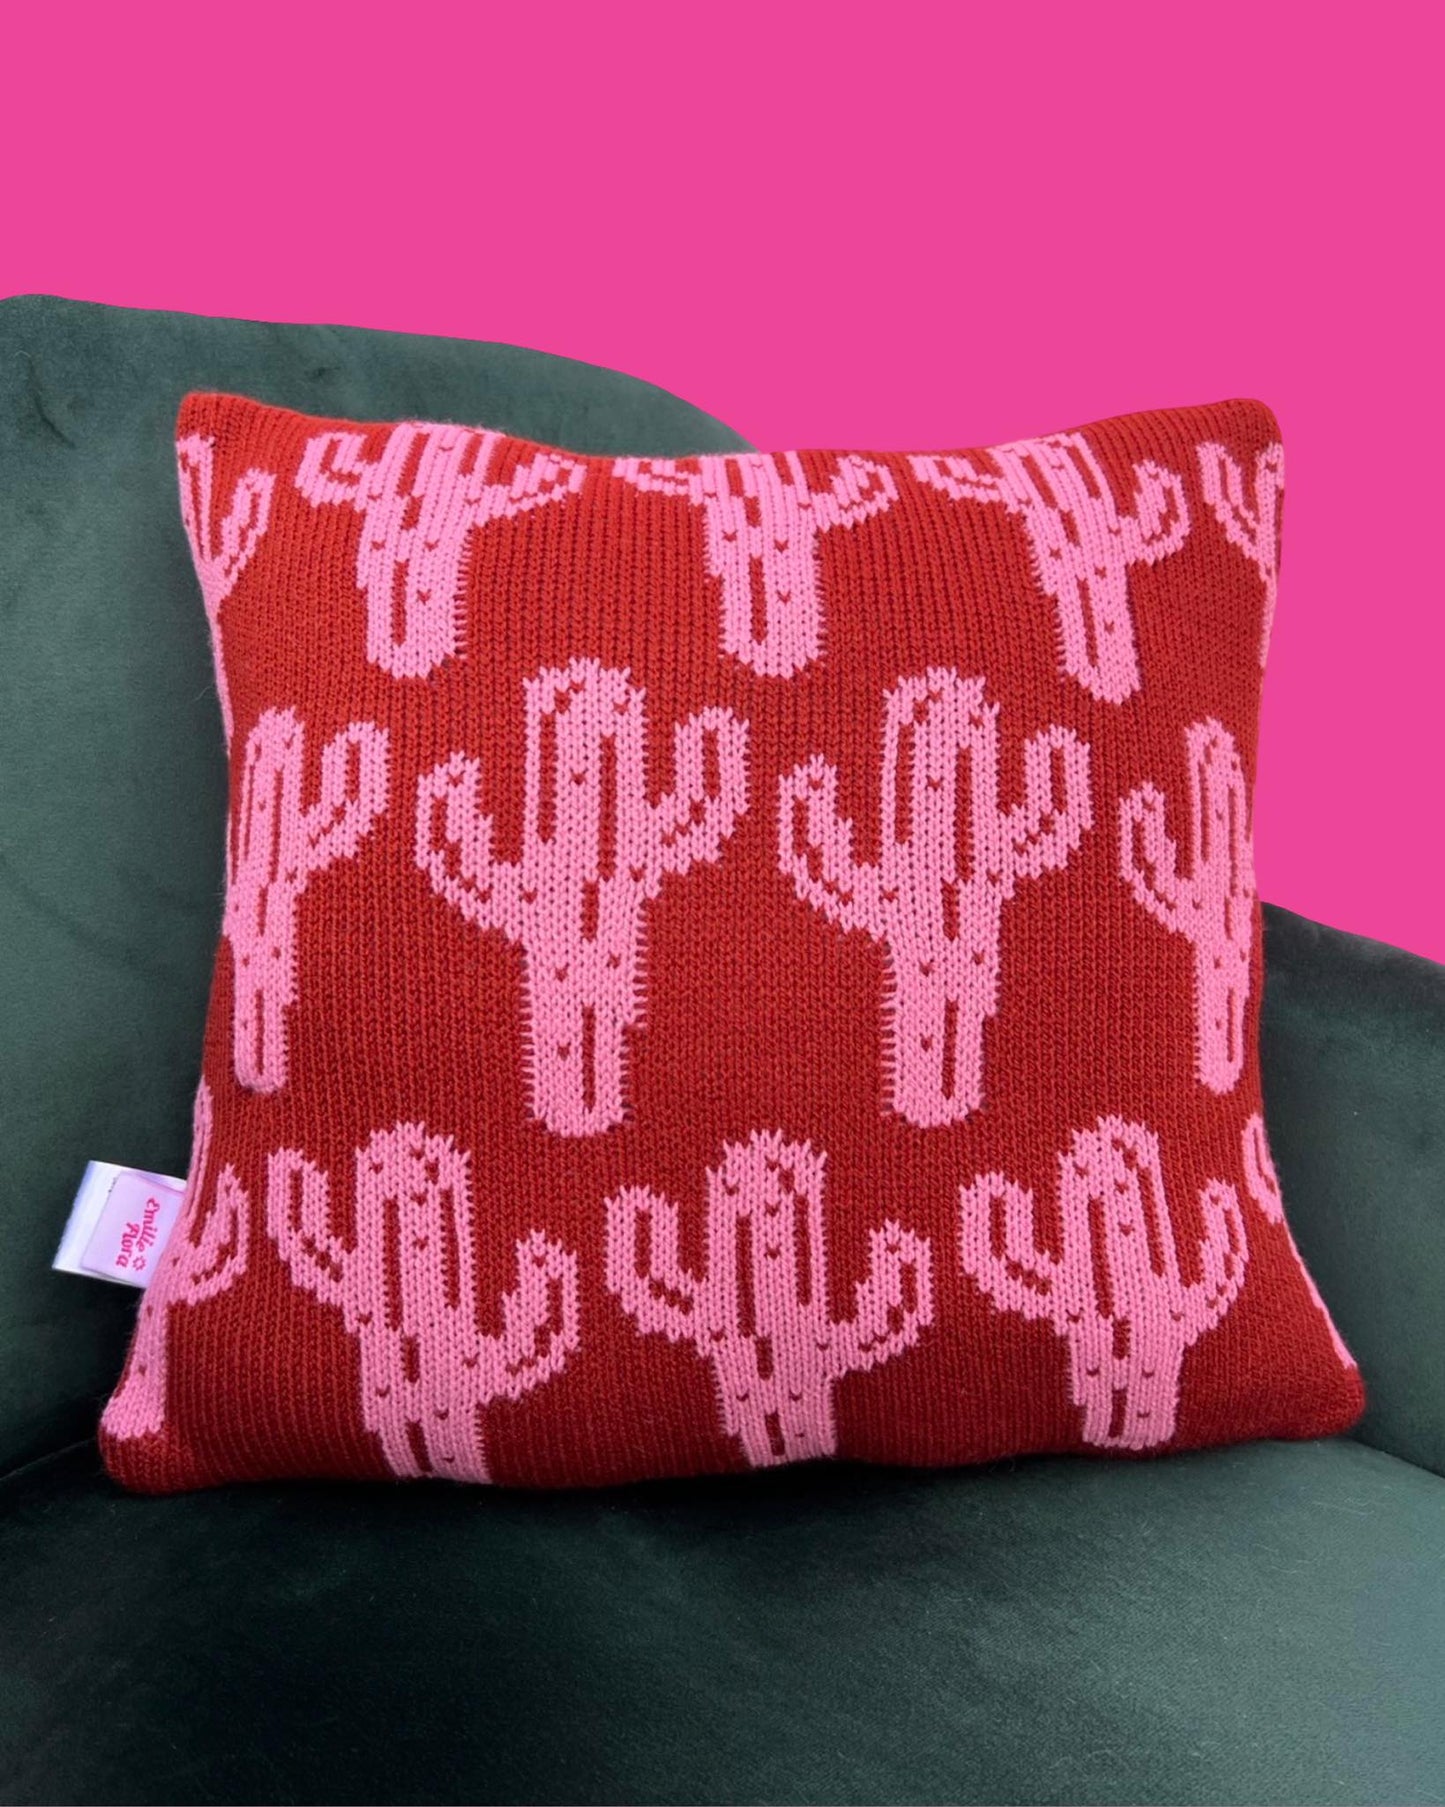 Cushion - Cactus Chestnut and Dusty Pink - READY TO SHIP